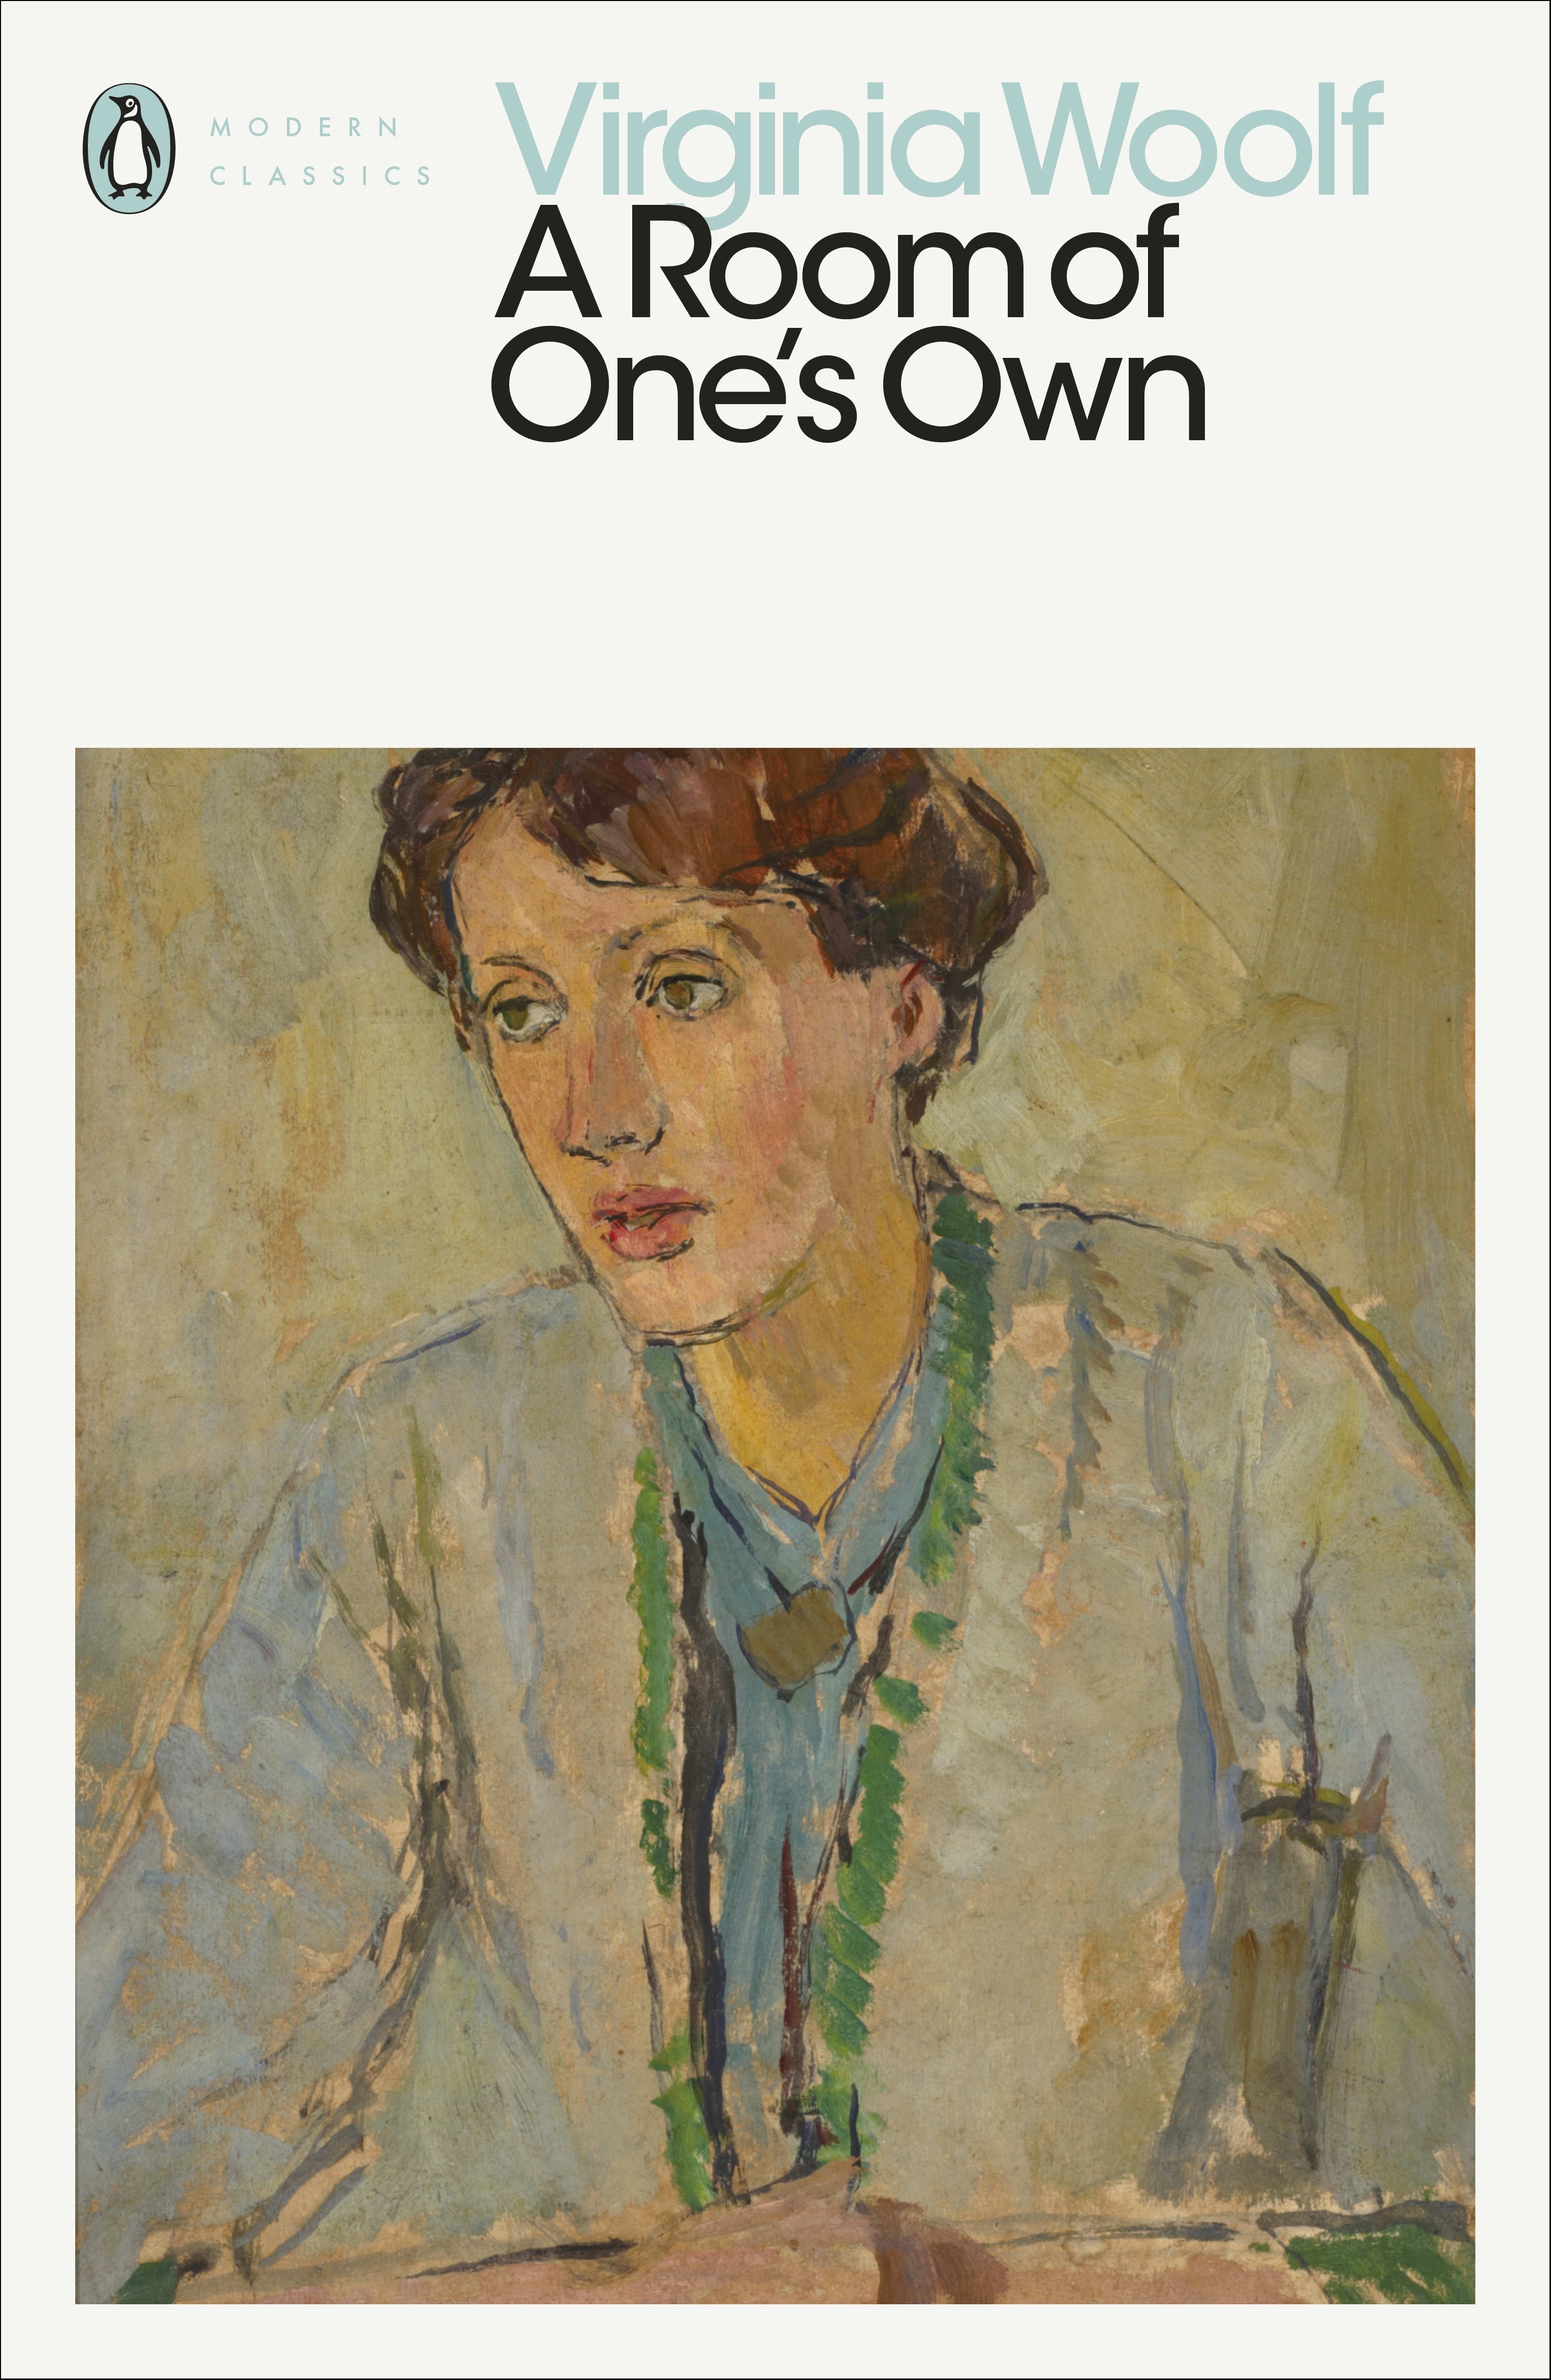 Book “A Room of One's Own” by Virginia Woolf — July 30, 2020